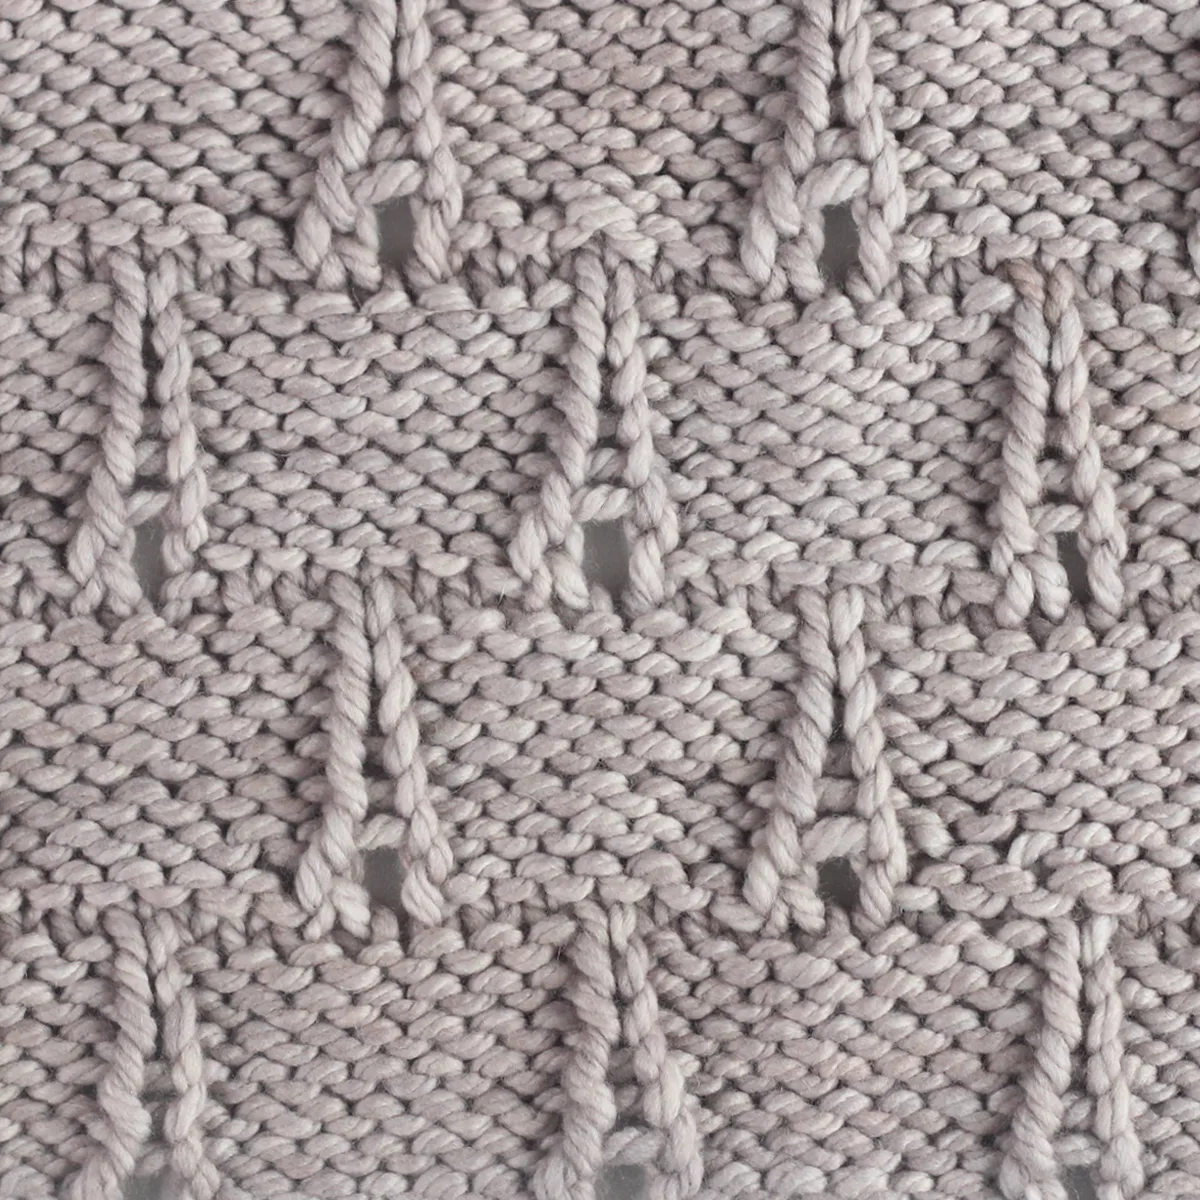 Eiffel Tower knitting pattern texture in gray colored yarn.